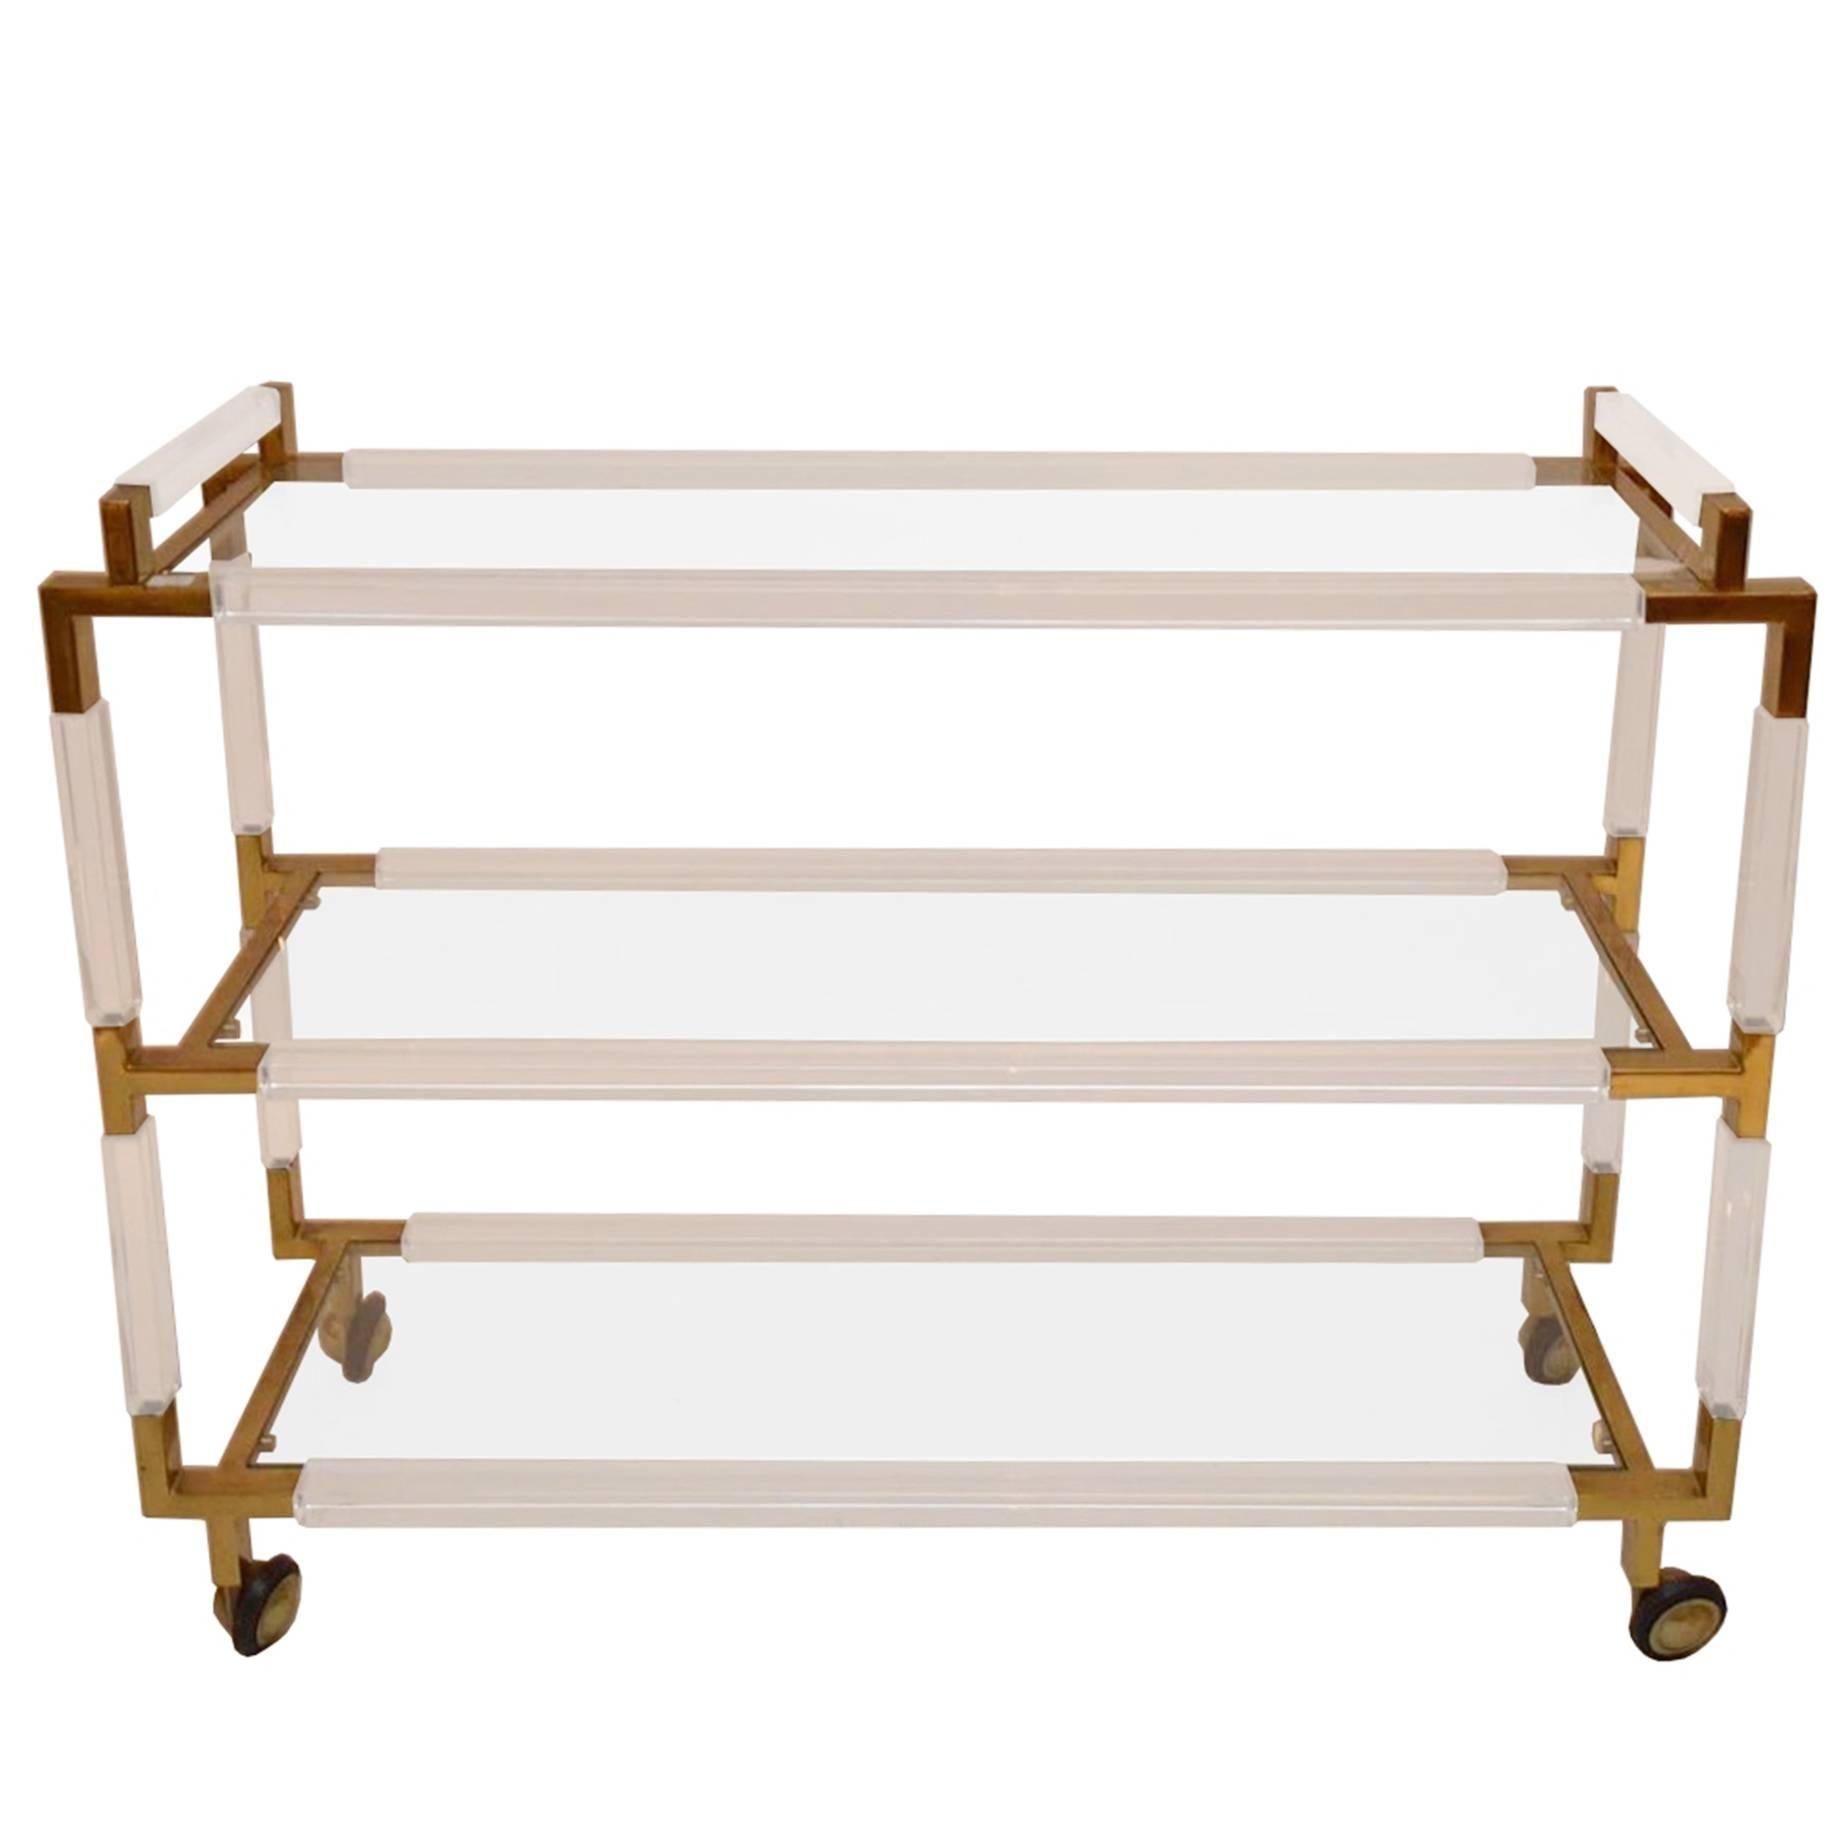 Rare Charles Hollis Jones Lucite and Brass Bar Cart from the "Metric" Collection